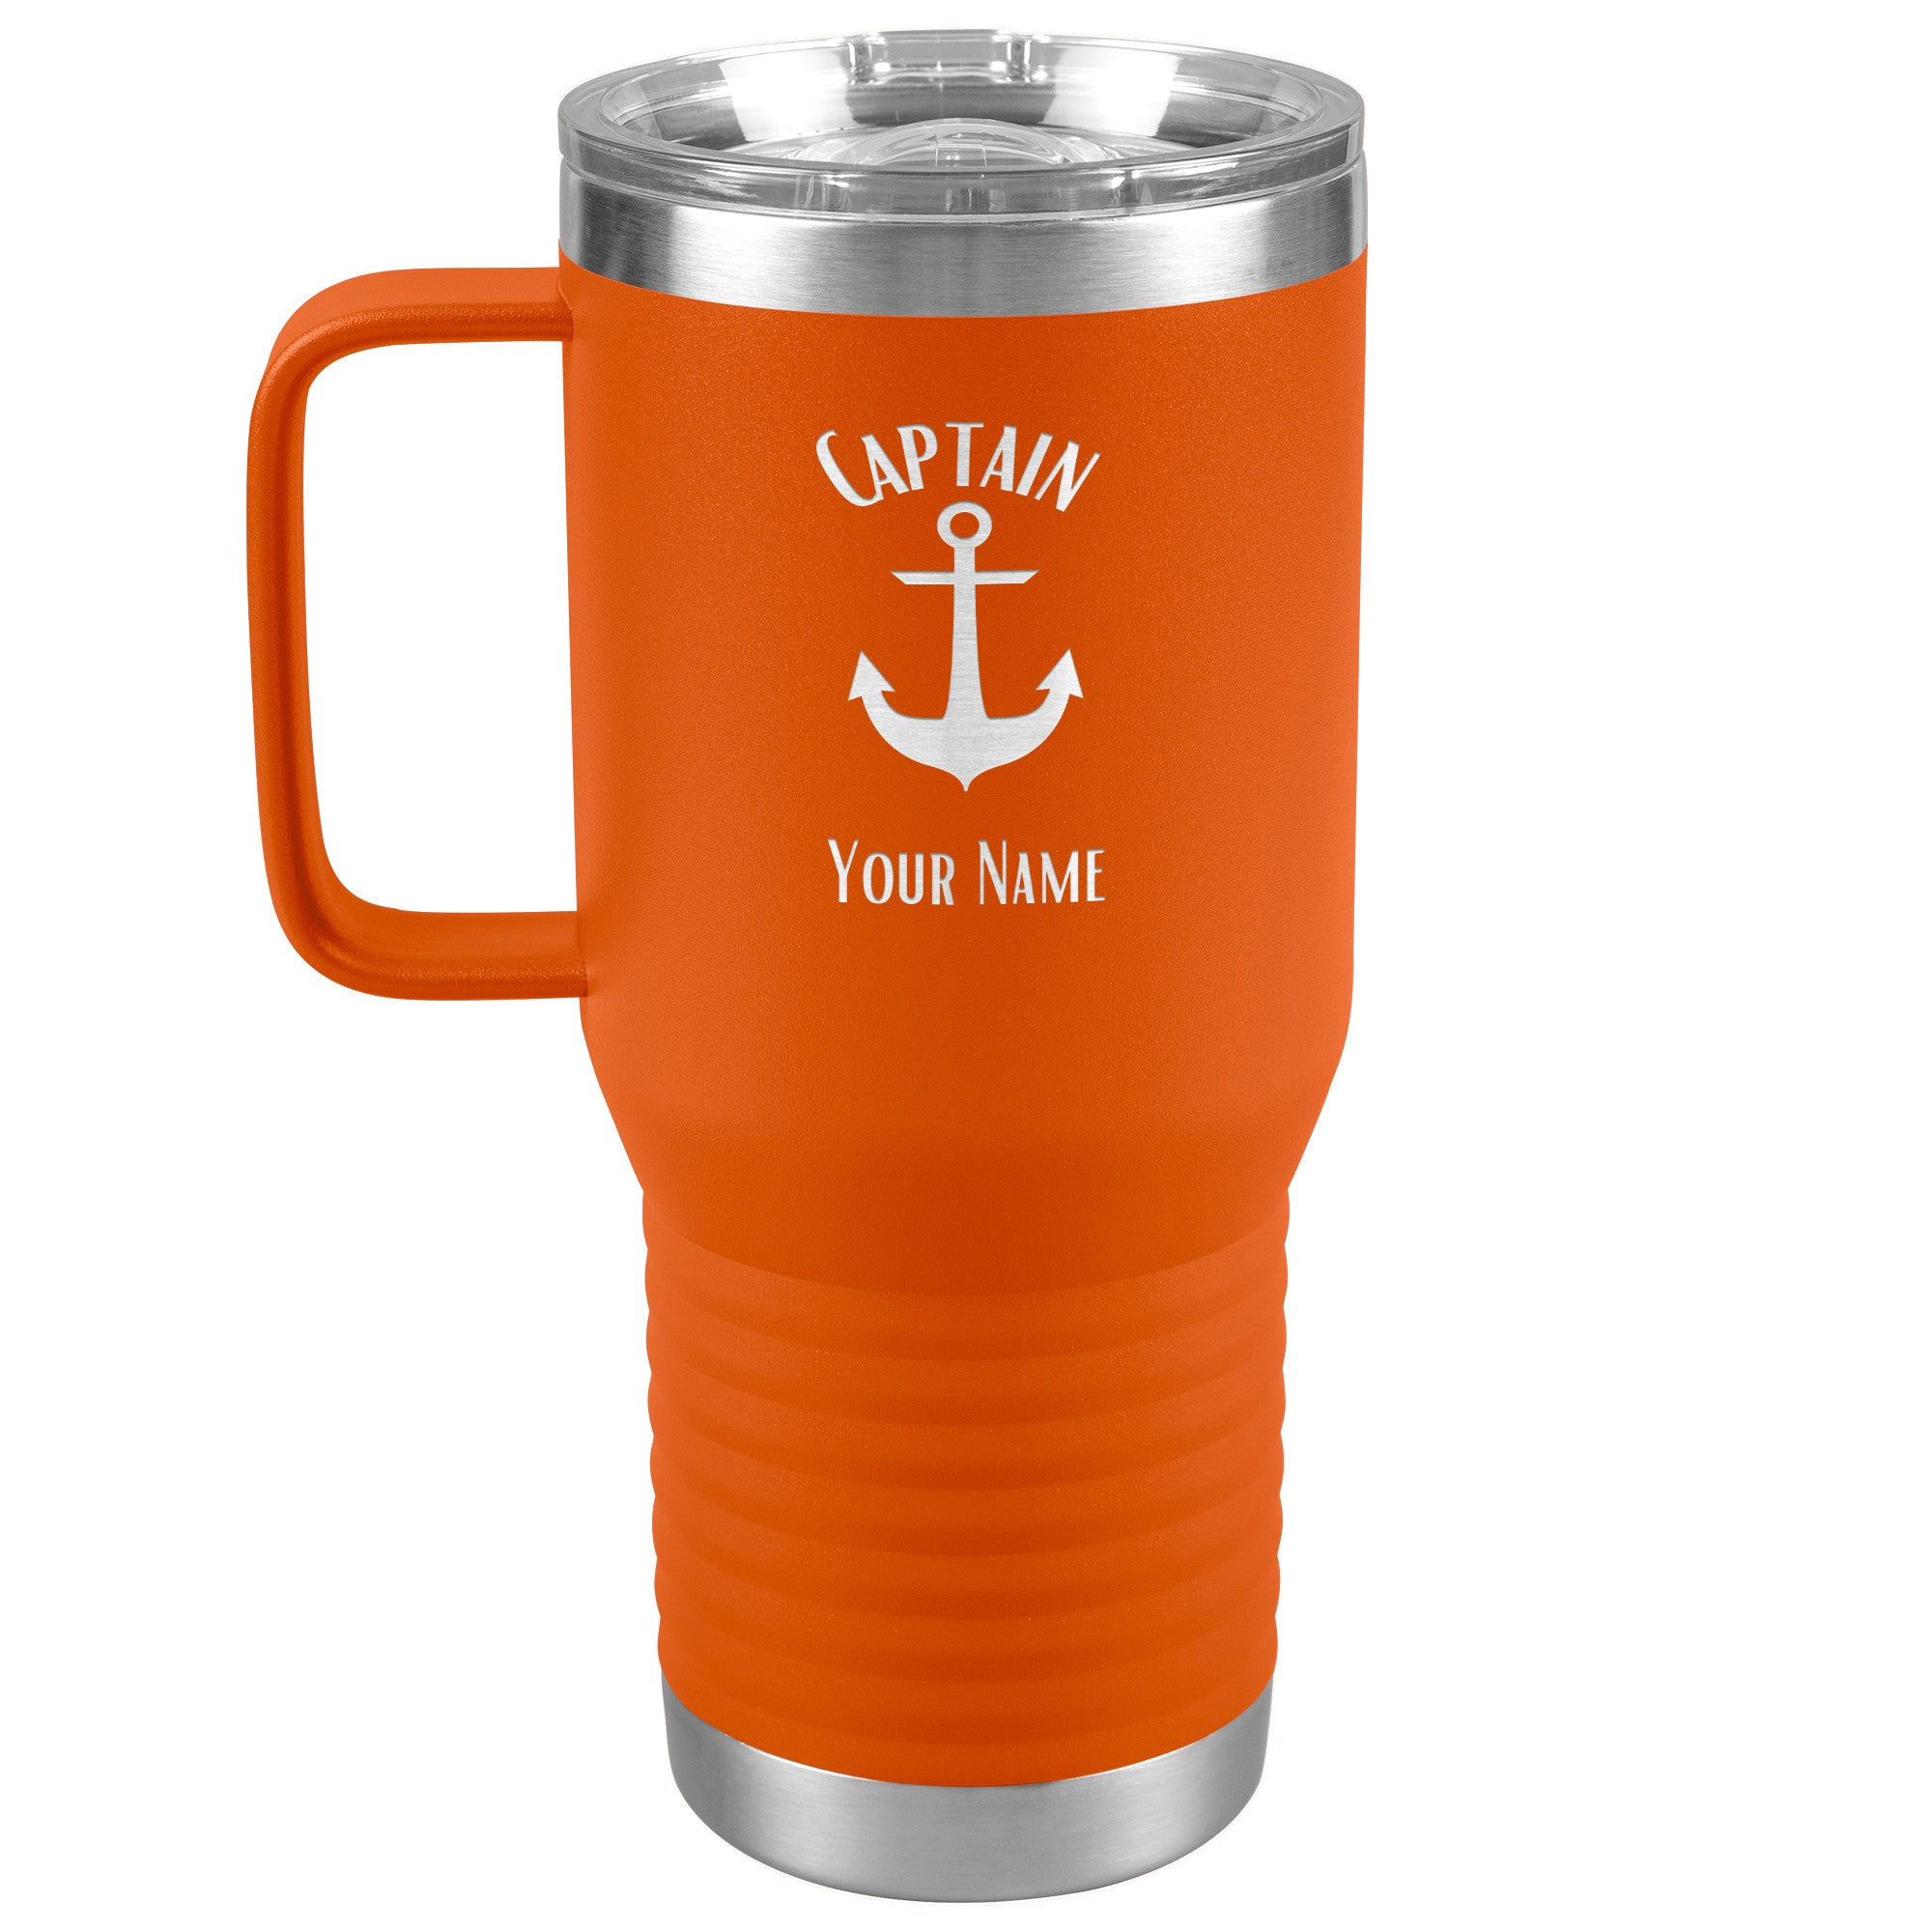 Personalized Captain Coffee Mug Boat Gift Cup Boater Accessories Custom Boating  Gift 15 Oz. 20 Oz. Anchor Nautical Gift Giant Mug 